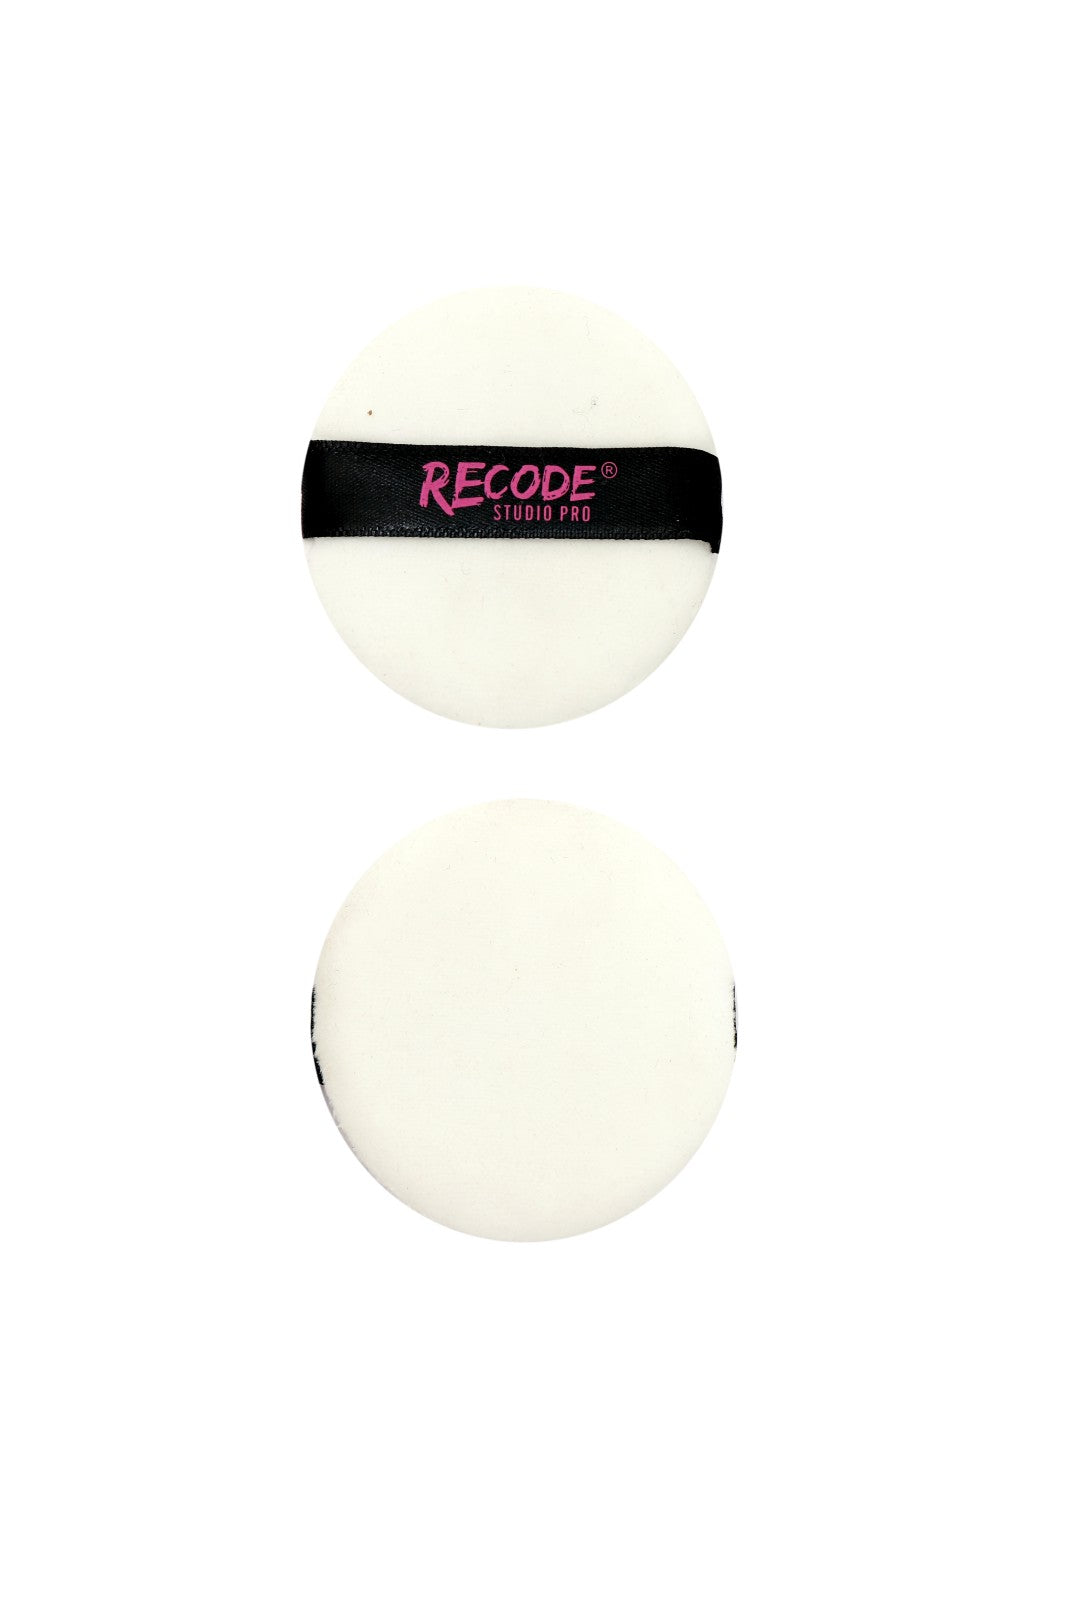 Recode Face Powder Puff- 1 Pc.